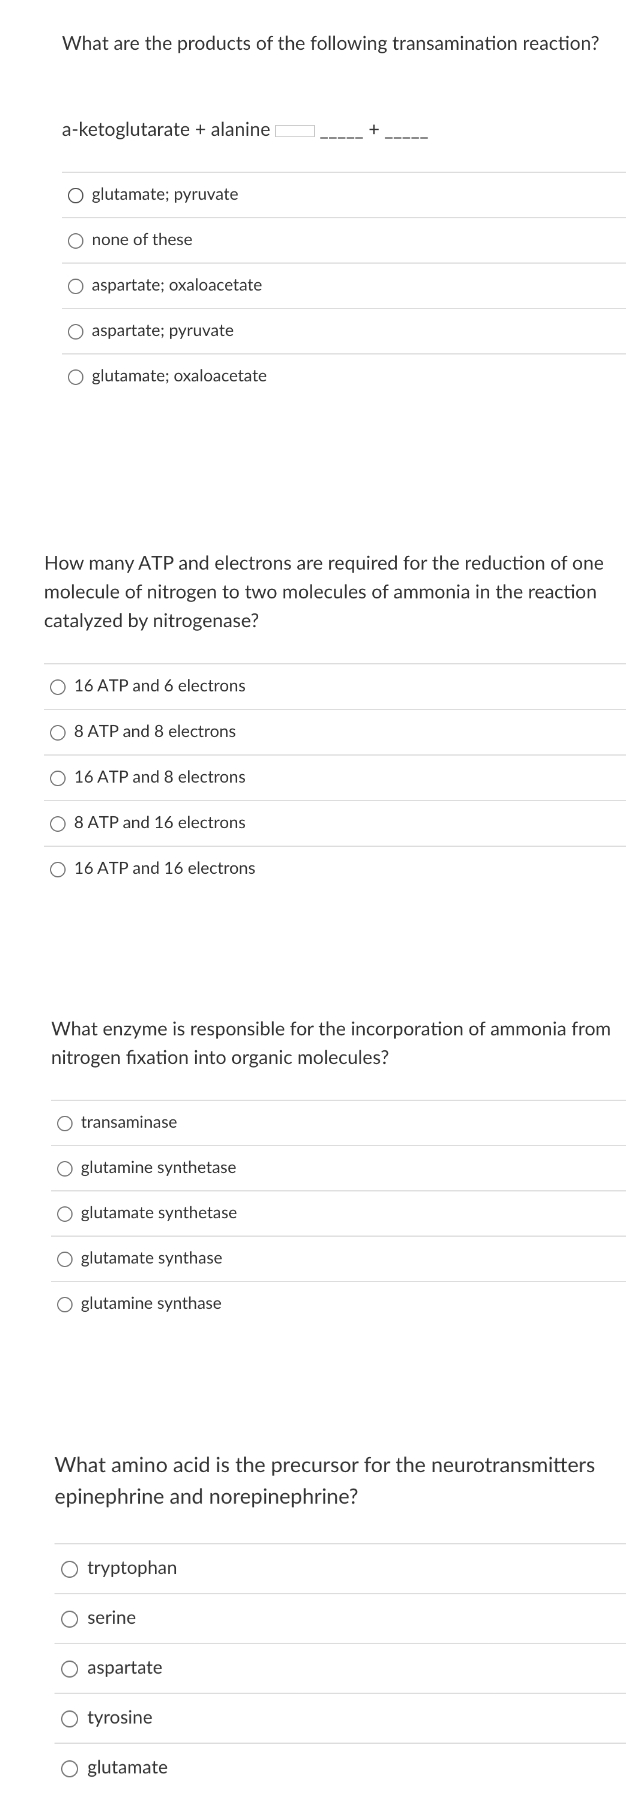 What are the products of the following transamination reaction?
a-ketoglutarate + alanine
O glutamate; pyruvate
none of these
O aspartate; oxaloacetate
O aspartate; pyruvate
O glutamate; oxaloacetate
How many ATP and electrons are required for the reduction of one
molecule of nitrogen to two molecules of ammonia in the reaction
catalyzed by nitrogenase?
O 16 ATP and 6 electrons
8 ATP and 8 electrons
O 16 ATP and 8 electrons
8 ATP and 16 electrons
O 16 ATP and 16 electrons
What enzyme is responsible for the incorporation of ammonia from
nitrogen fixation into organic molecules?
O transaminase
glutamine synthetase
O glutamate synthetase
O glutamate synthase
O glutamine synthase
What amino acid is the precursor for the neurotransmitters
epinephrine and norepinephrine?
O tryptophan
O serine
aspartate
O tyrosine
O glutamate
O O
